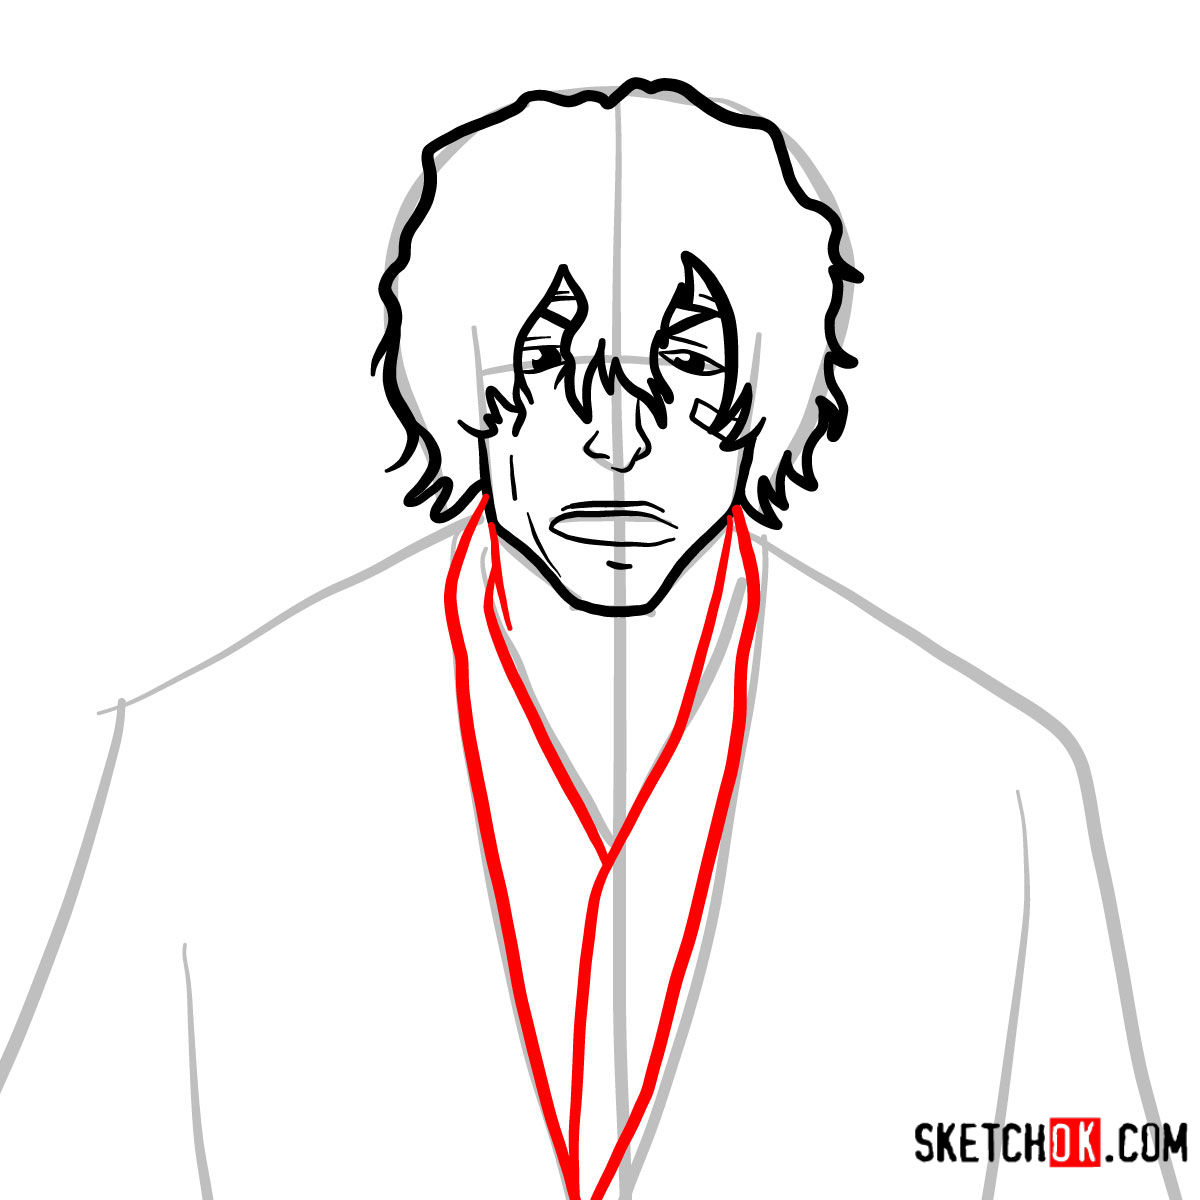 How to Draw Yasutora Chad Sado from Bleach in Easy Steps - Page 2 of 2 -  How to Draw Step by Step Drawing Tutorials